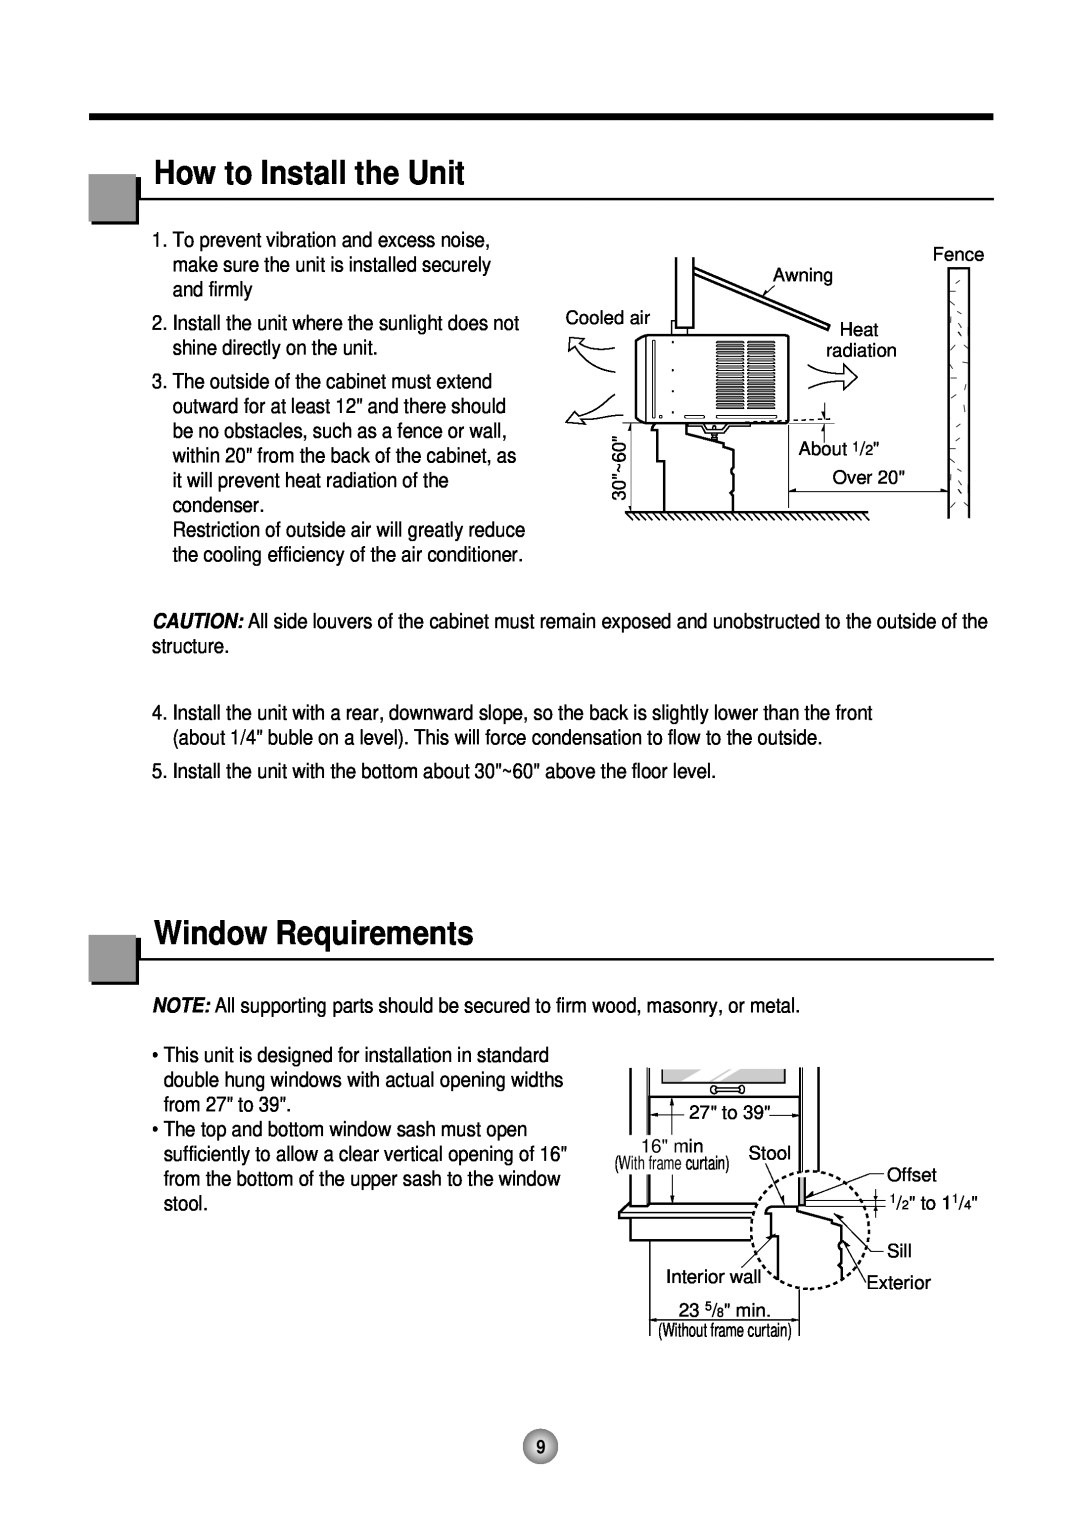 Friedrich CP10 How to Install the Unit, Window Requirements, Cooled air 30~60, Fence Awning Heat radiation About 1/2 Over 